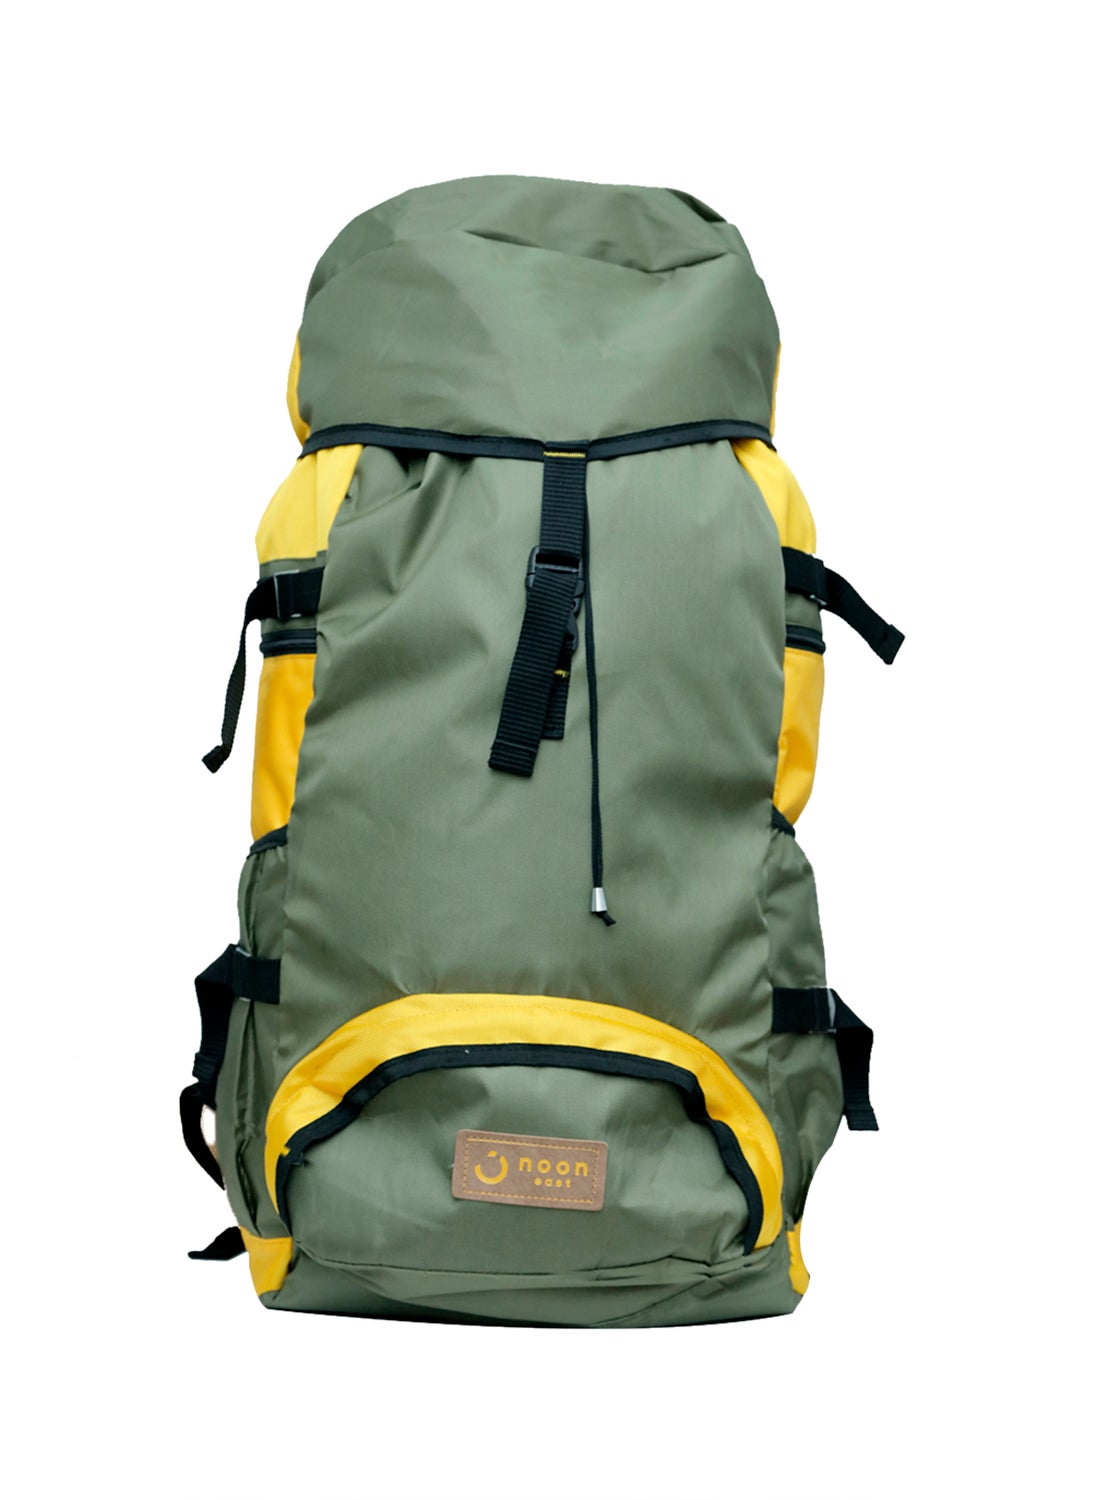 Buy Bleu Rucksack Hiking Bag with Laptop Compartment - (BP-2015, Volume:-  50+5 Liters, Product Dimensions (LxWxH):- 14x9x24 inches, 1 year Warranty)  Online at Lowest Price Ever in India | Check Reviews &